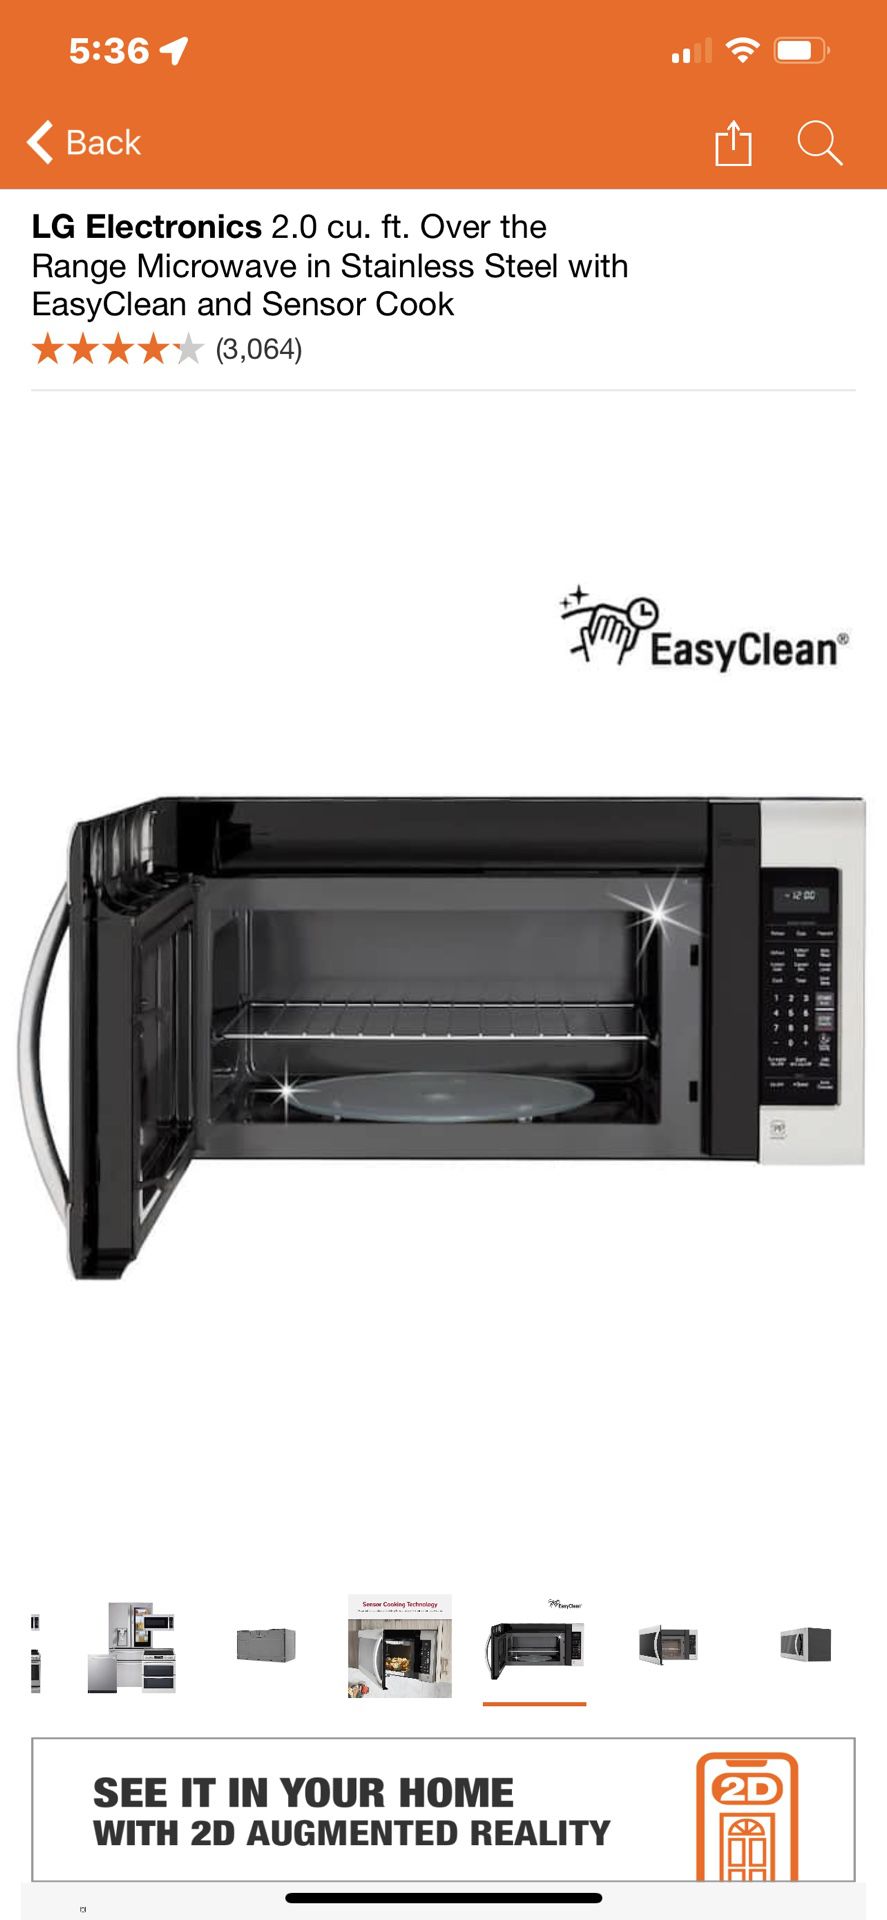 LG Electronics 2.0 cu. ft. Over the Range Microwave  in Stainless Steel with EasyClean and Sensor Cook .